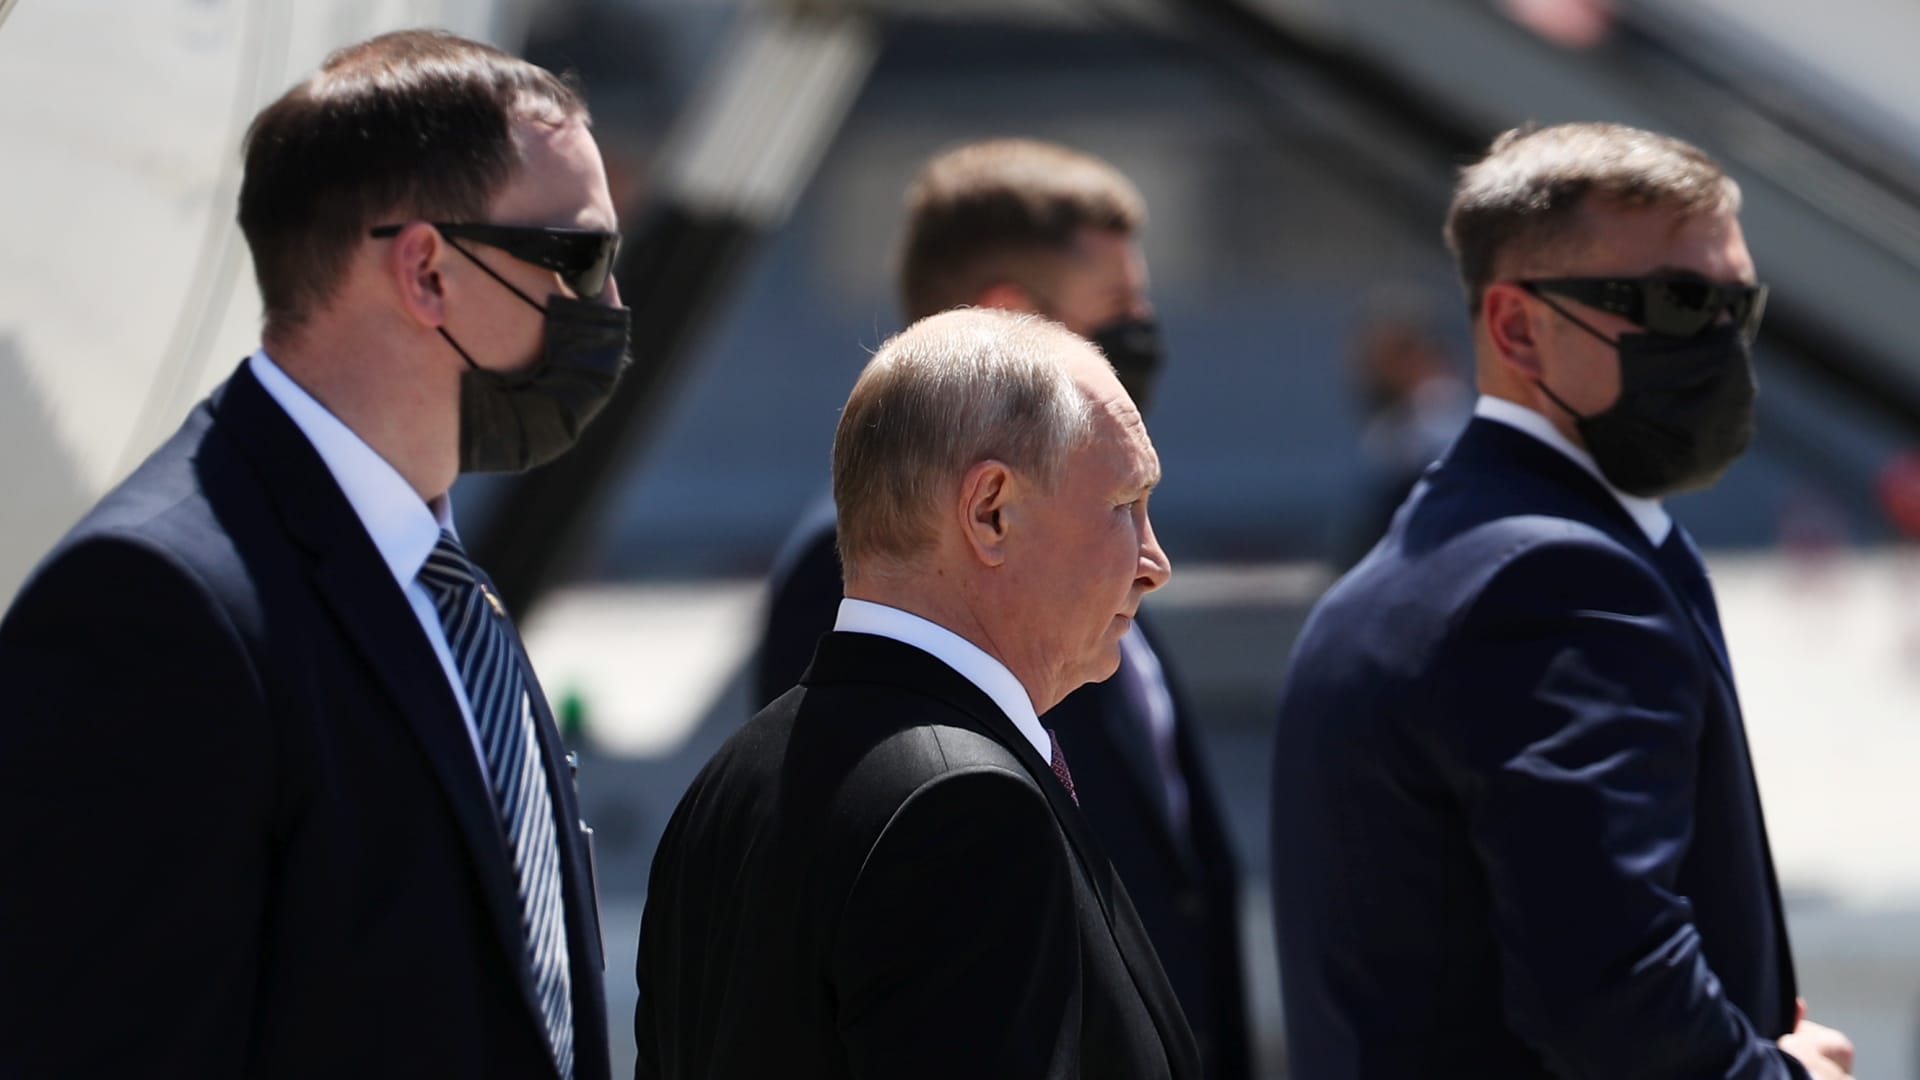 Russia's President Vladimir Putin (C) welcomed at Geneva Airport as he arrives for a Russia-United States summit.